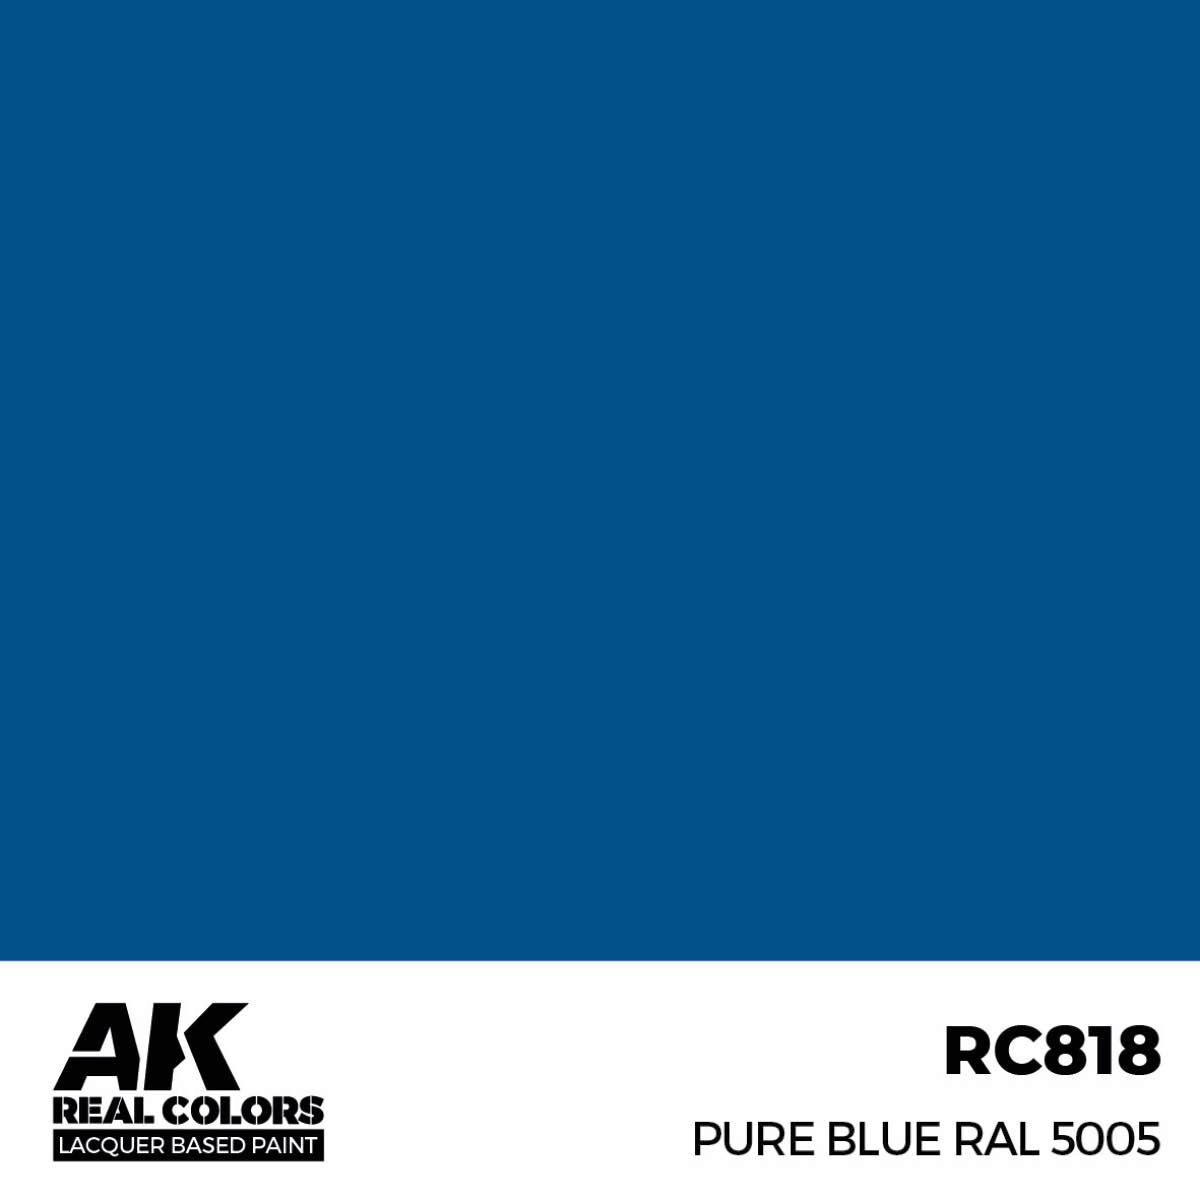 AK RC818 Real Colors Pure Blue RAL 5005 17 ml.